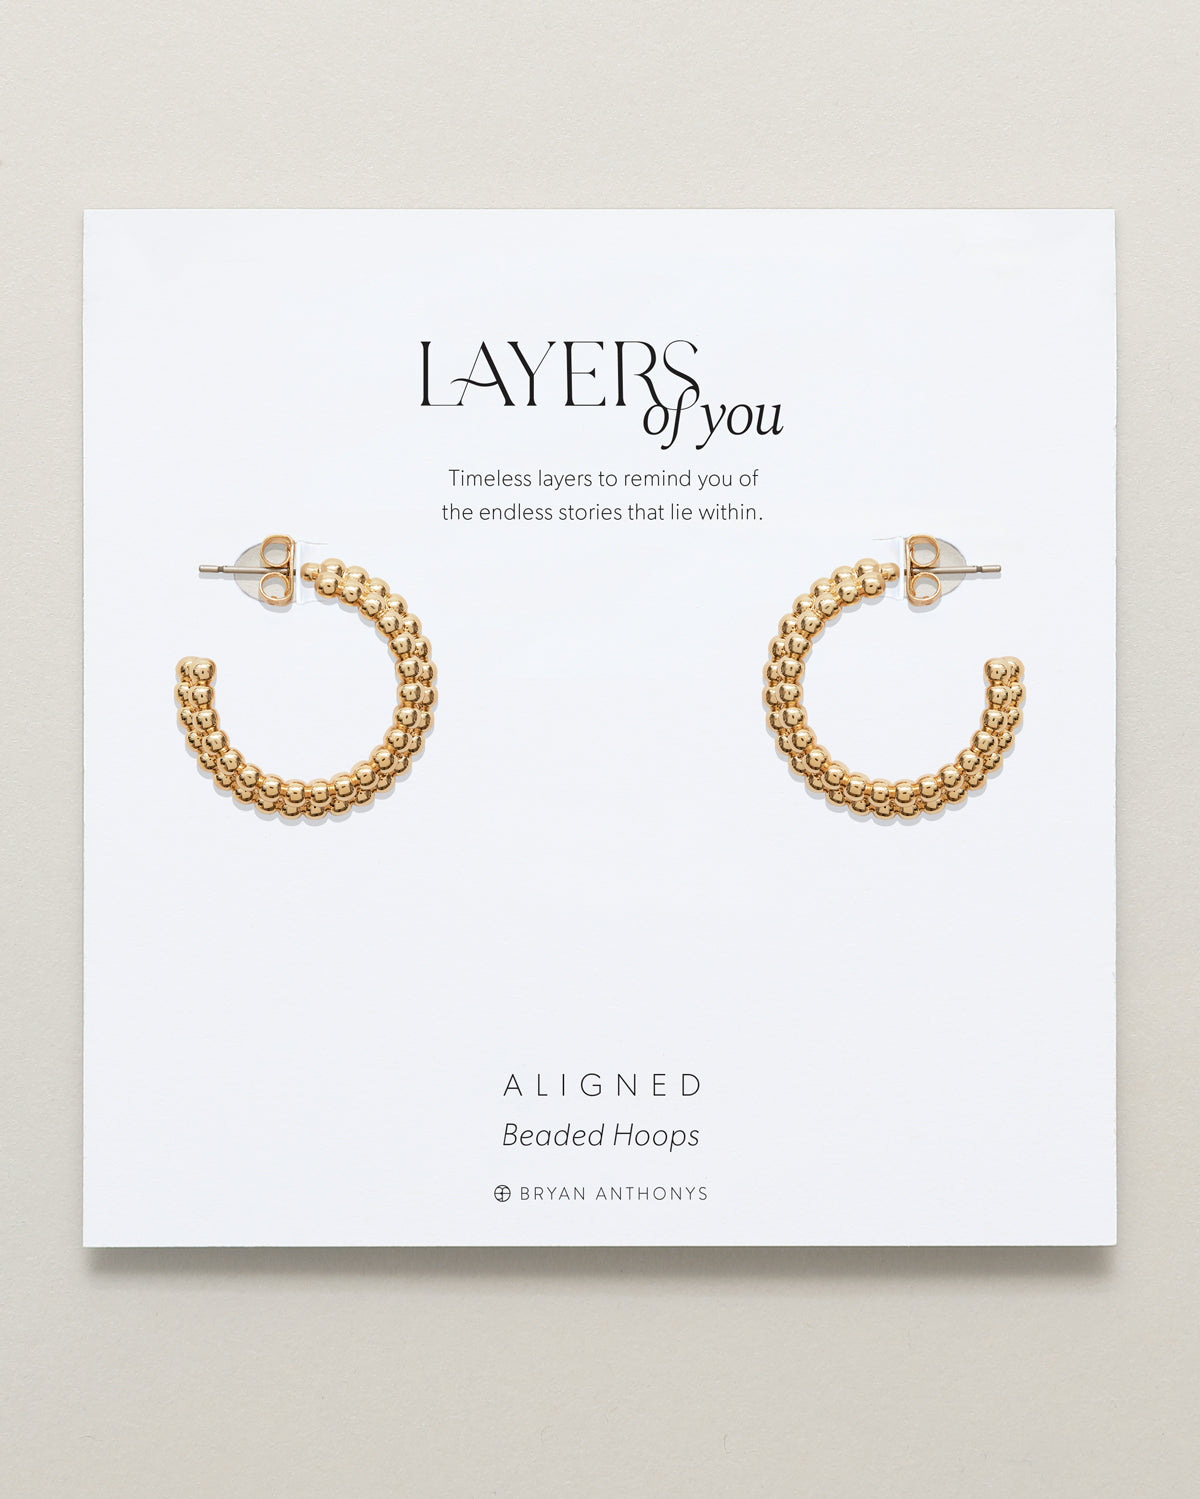 Bryan Anthonys Layers of You Gold Aligned Beaded Hoops On Card